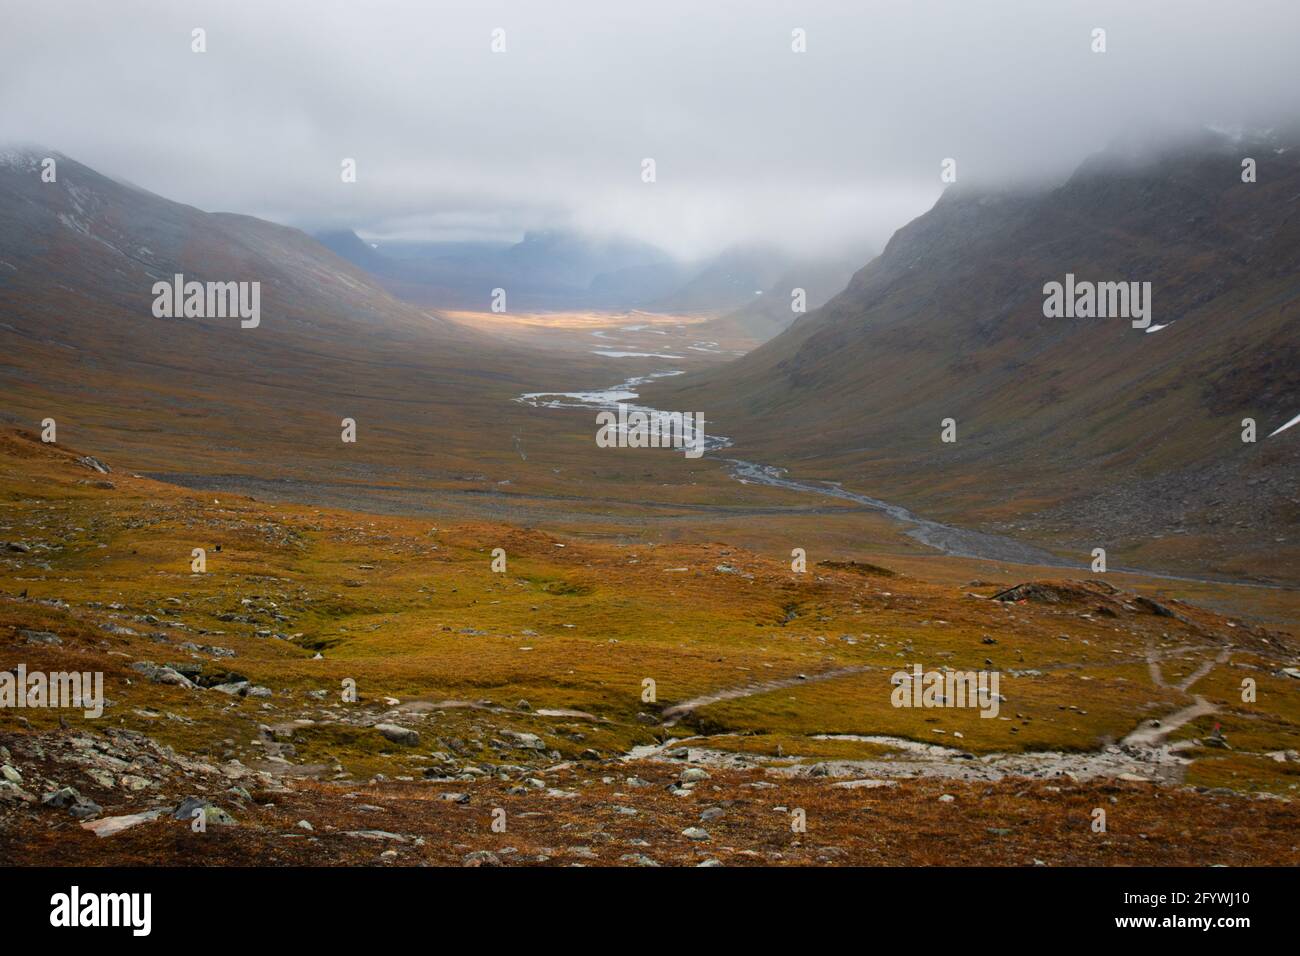 The view of the valley in the direction of Sälka, hiking Kungsleden (king's) trail, rainy day, Lapland, Sweden, September 2020. Stock Photo